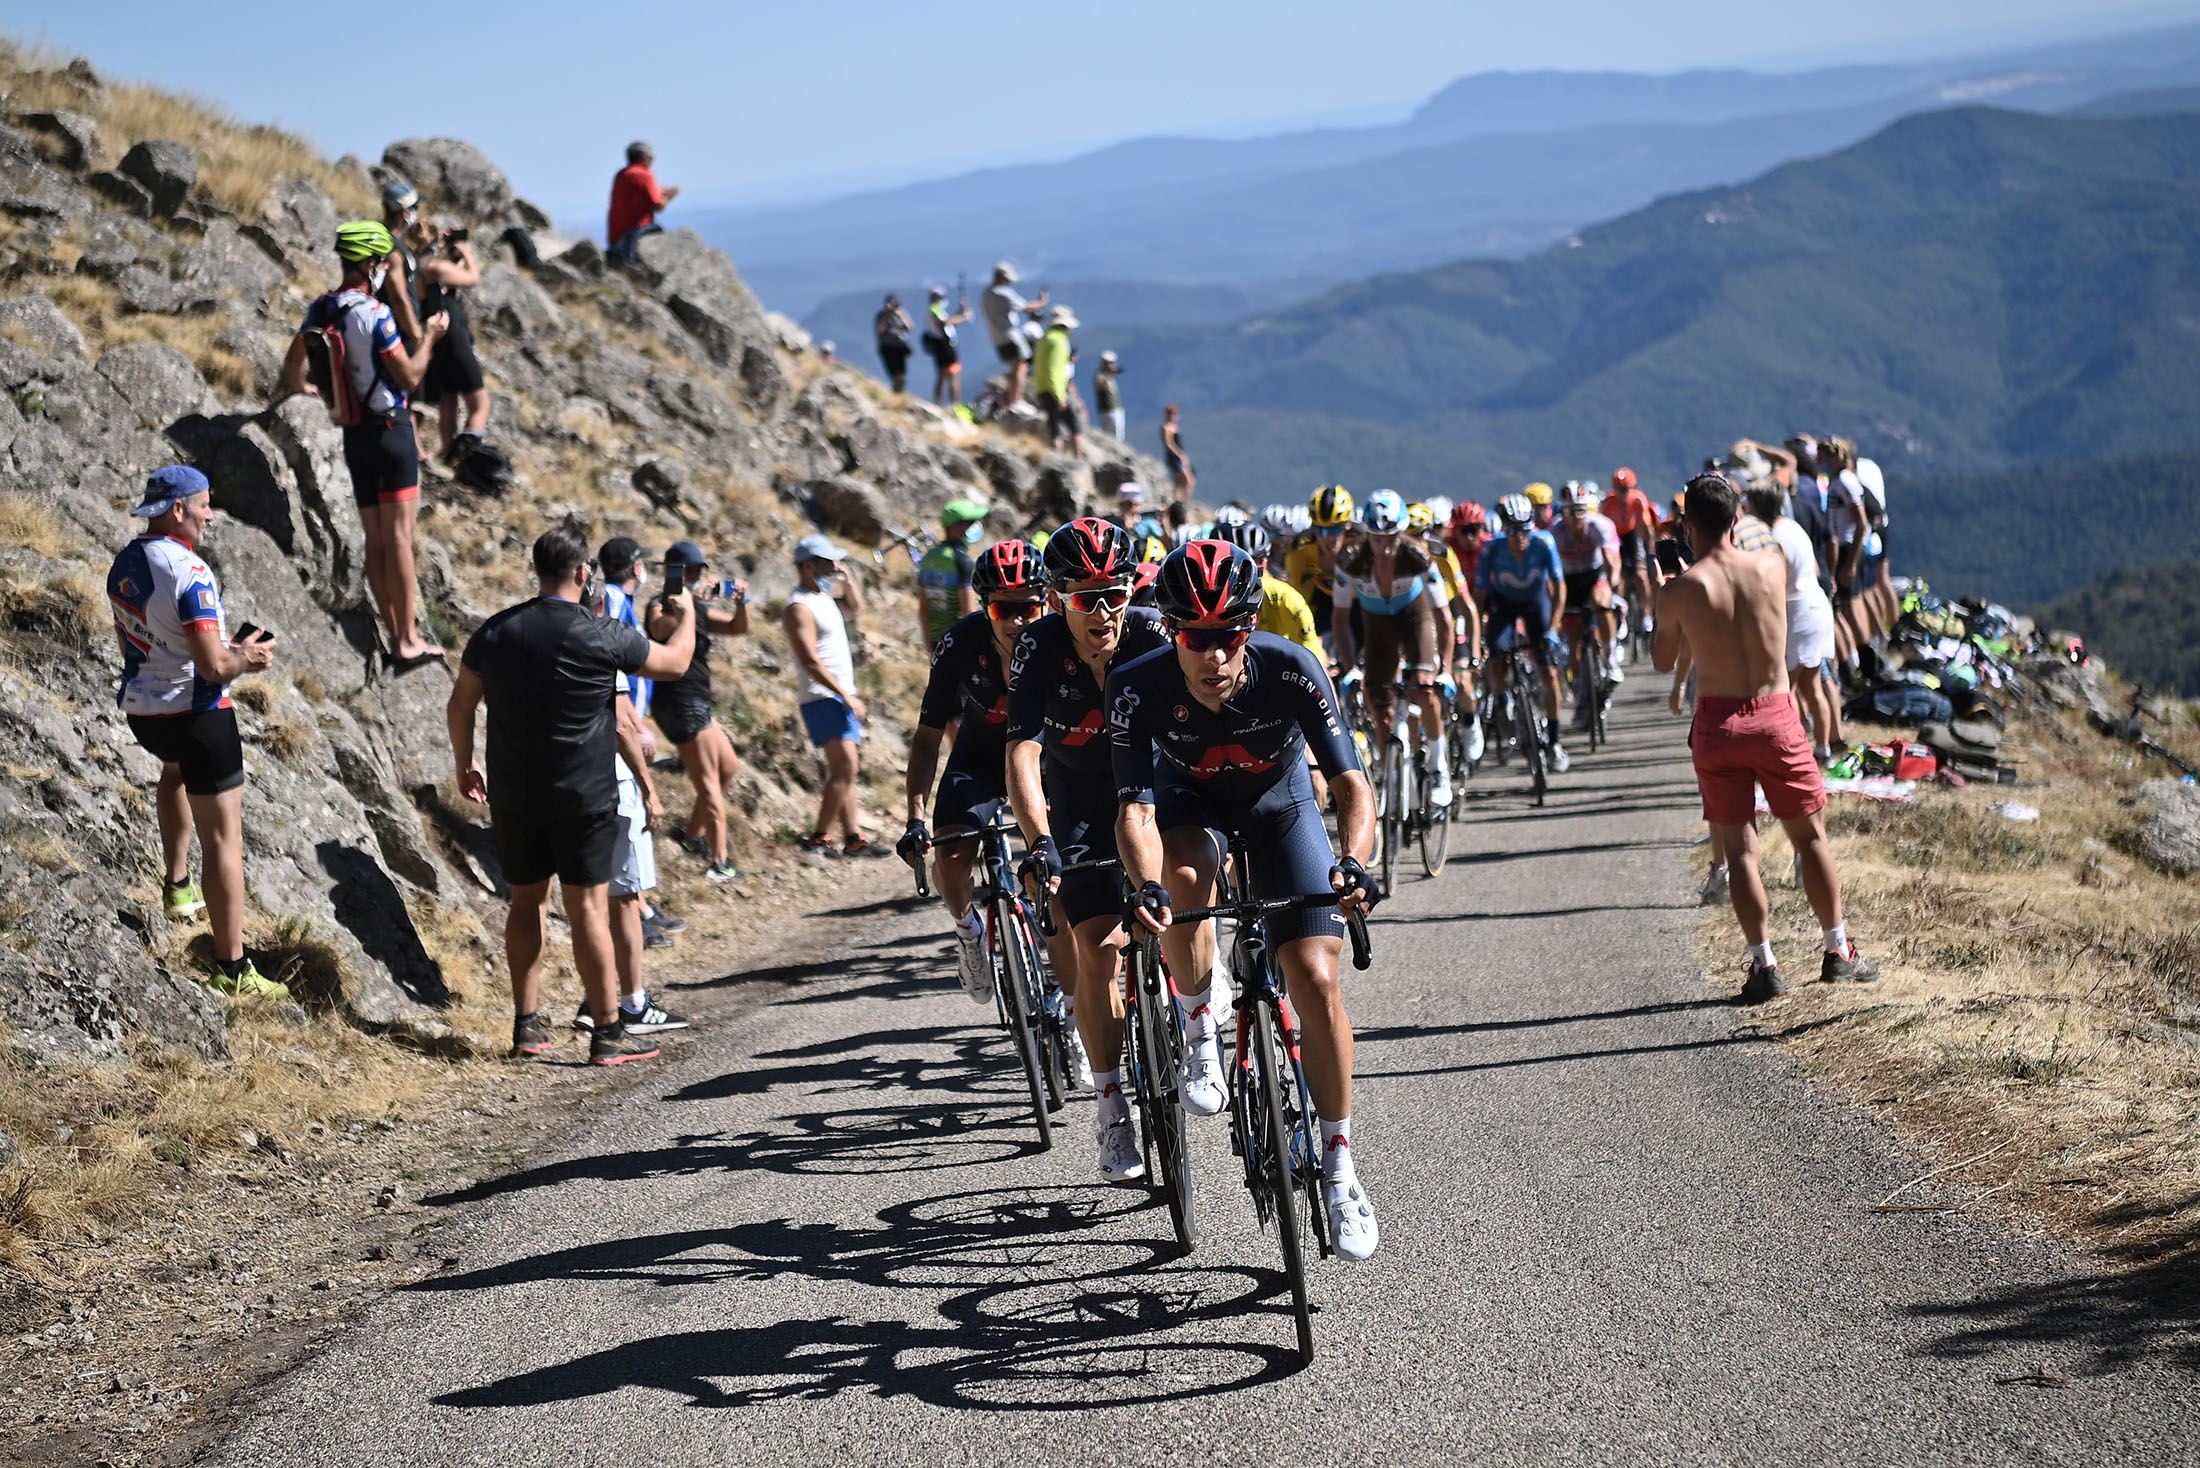 The pack rides during the 6th stage of the 107th edition of the Tour de France cycling race, 191 km between Le Teil and Mont Aigoual, on Sept.&nbsp;3.